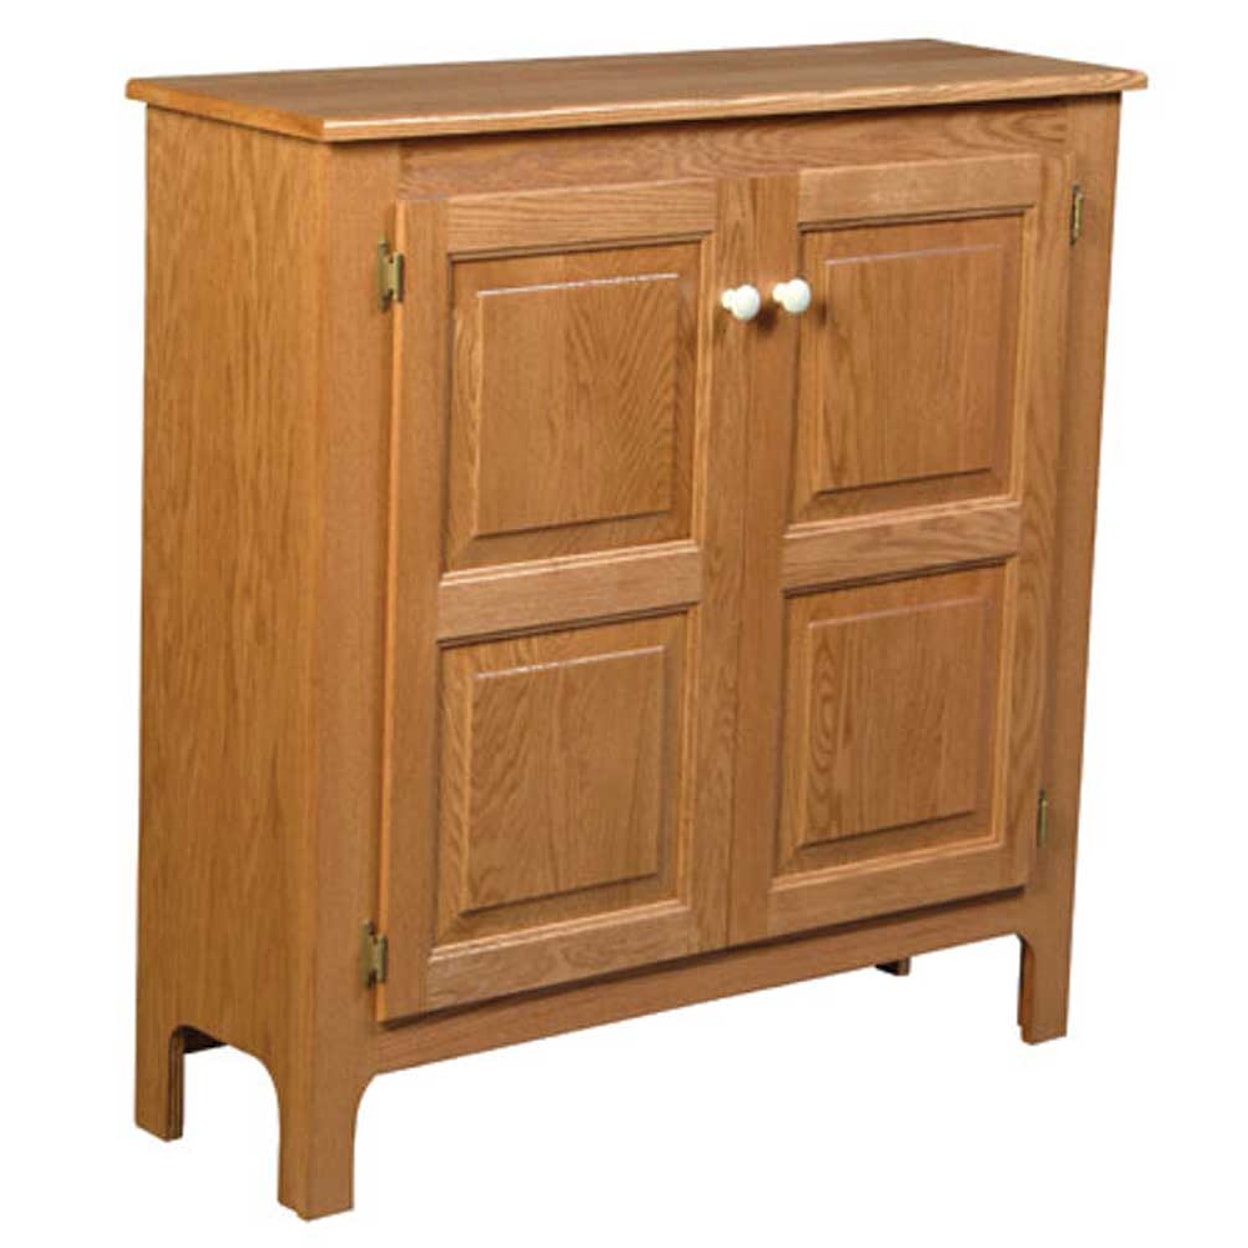 Simply Amish Country Double Door Pie Safe